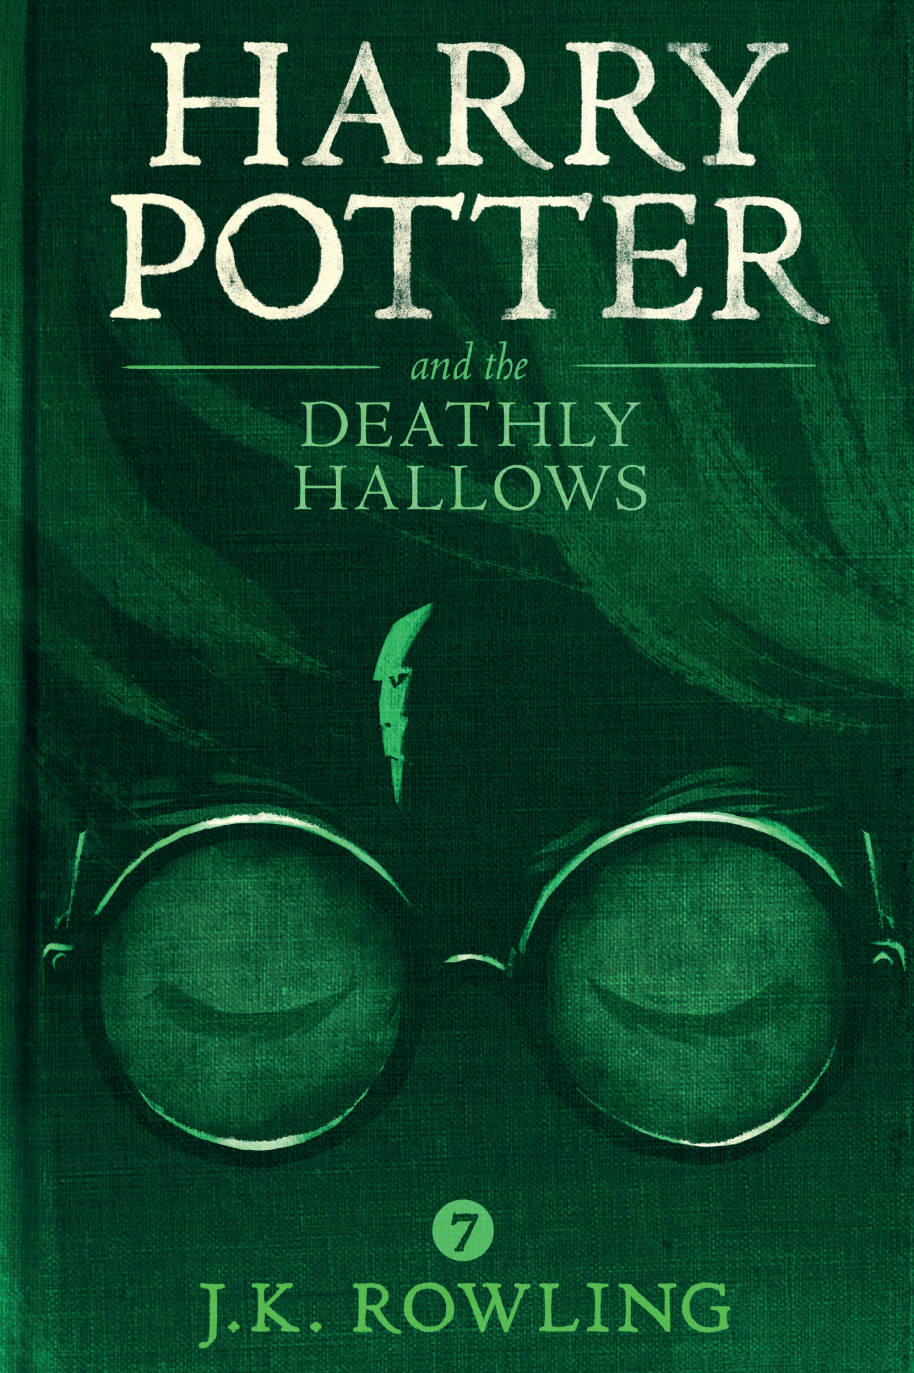 Olly Moss Deathly Hallows cover